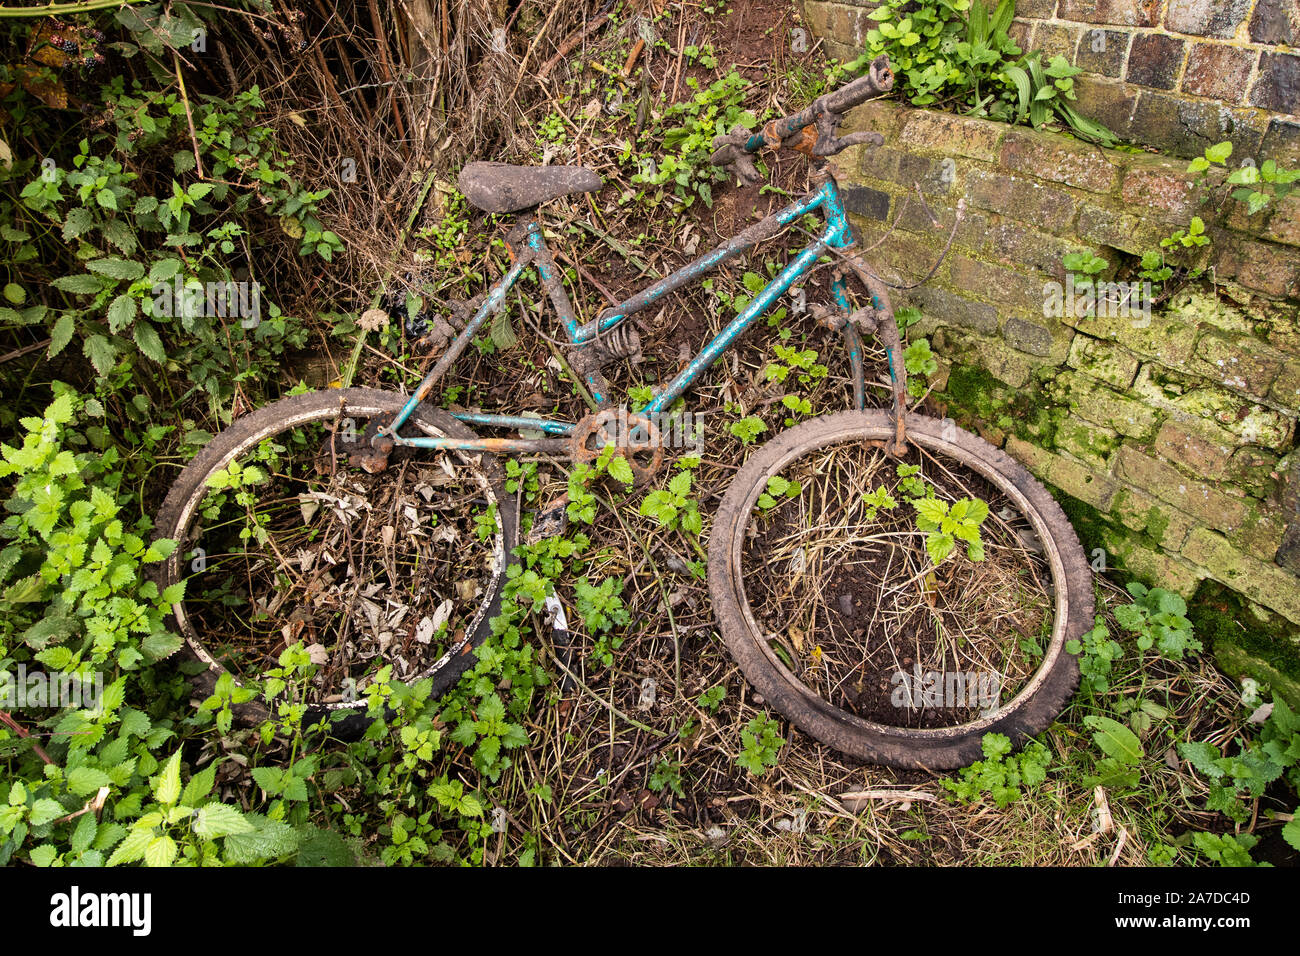 Canal debris lying on the towpath of the Coventry canal near Nuneaton, Warwickshire. A bicycle almost engulfed by nature. Stock Photo